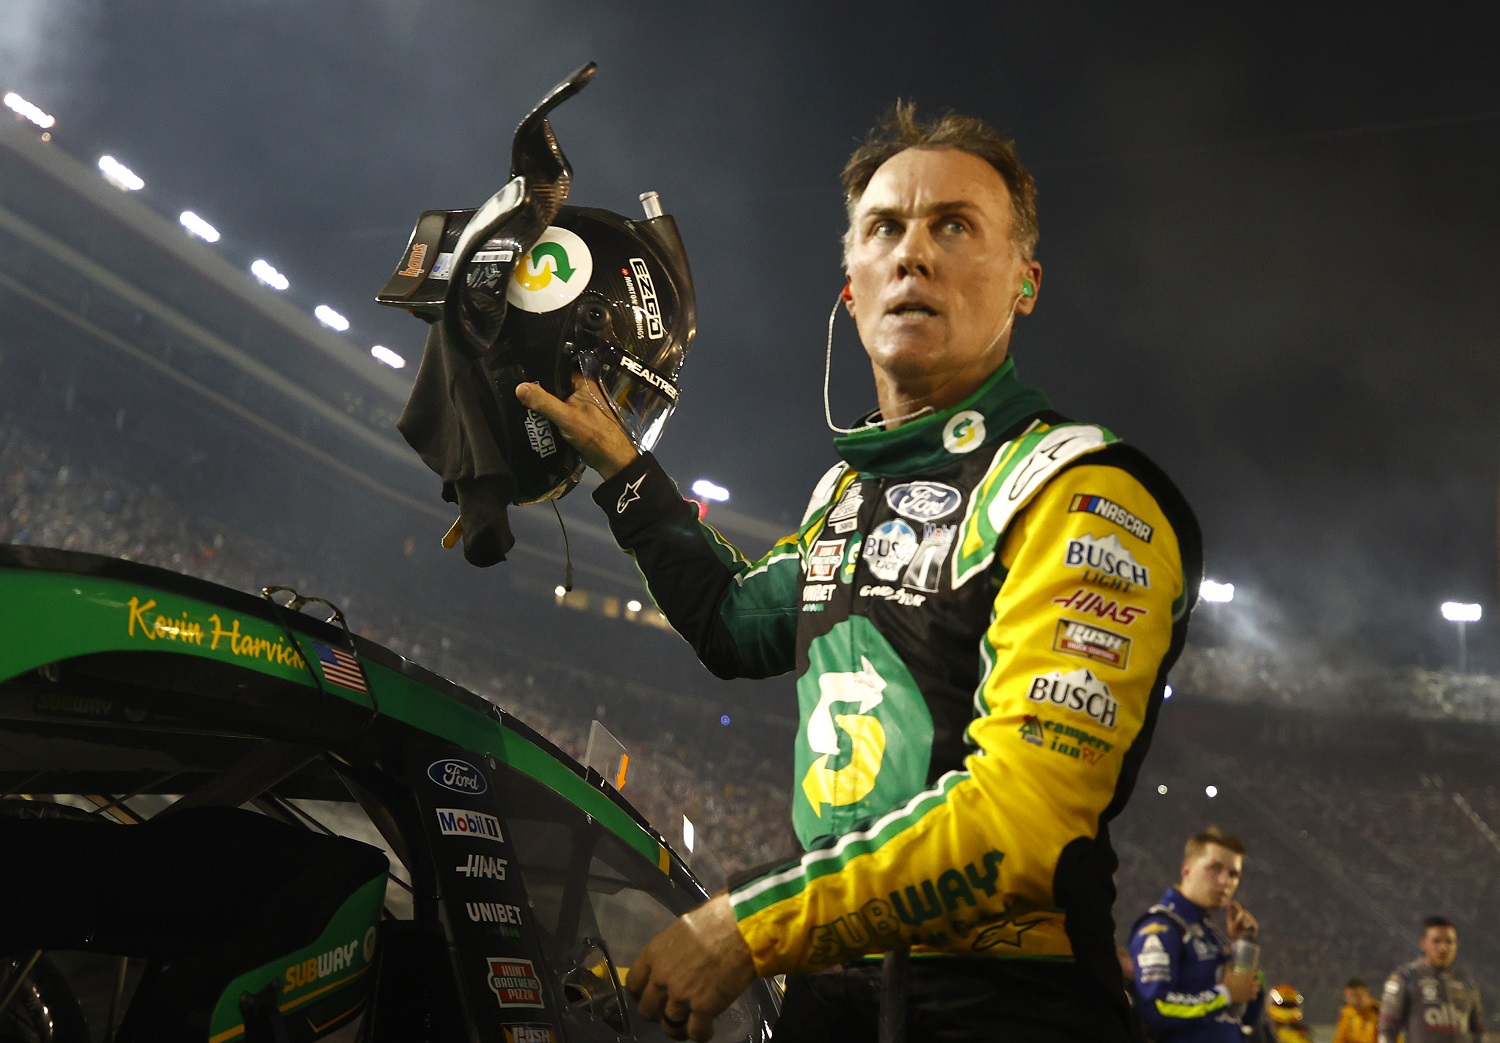 Kevin Harvick exits his car after the NASCAR Cup Series Bass Pro Shops Night Race at Bristol Motor Speedway on Sept. 18, 2021, in Bristol, Tennessee.